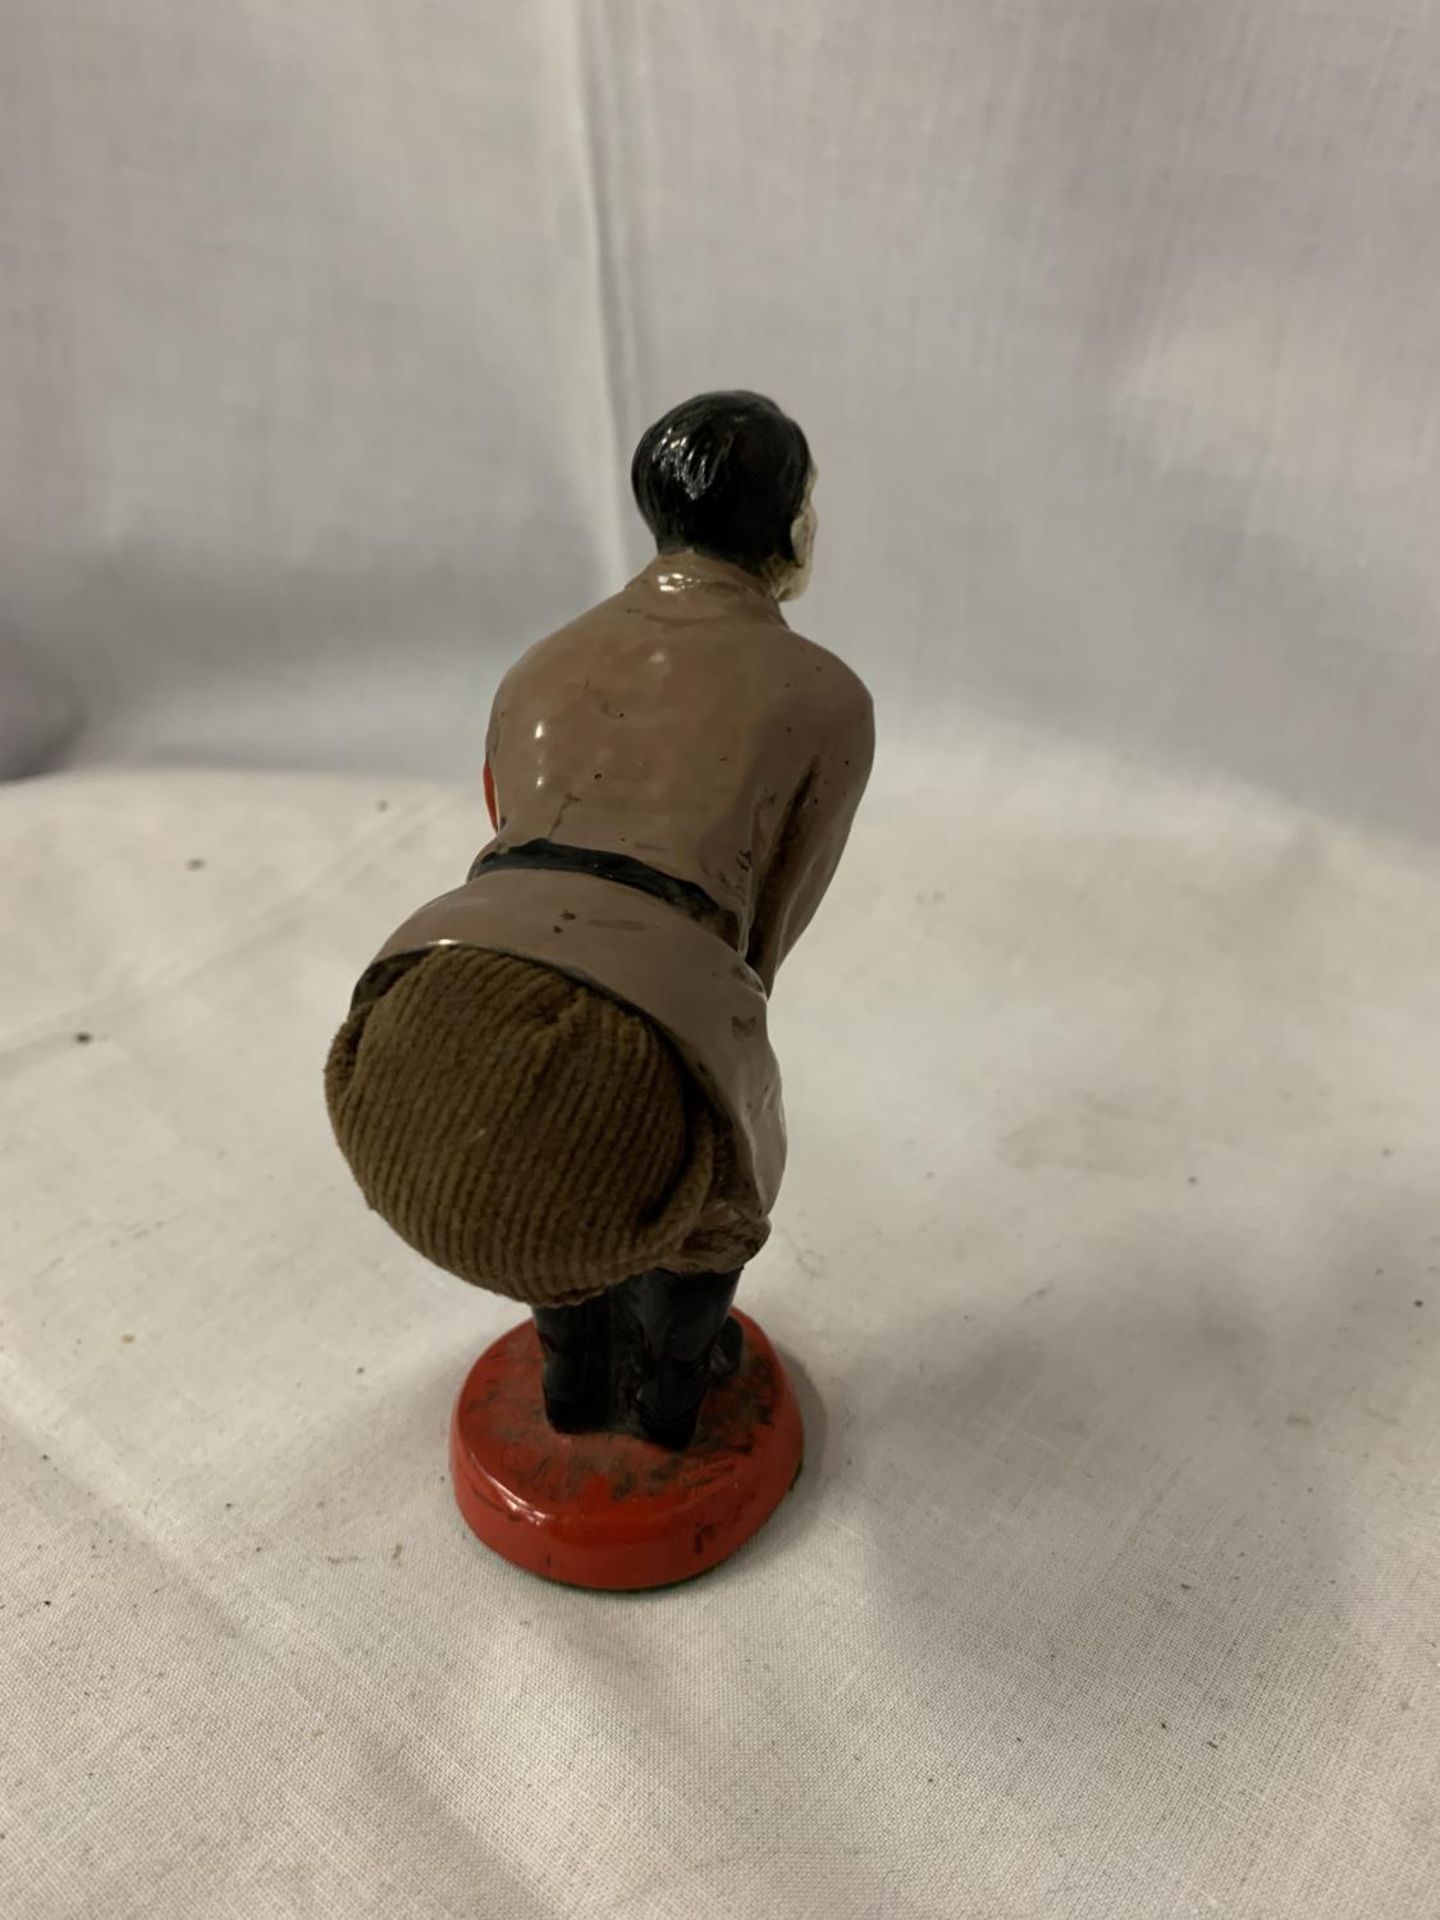 A COLD PAINTED ADOLF HITLER BRONZE FIGURINE PIN CUSHION - Image 2 of 3